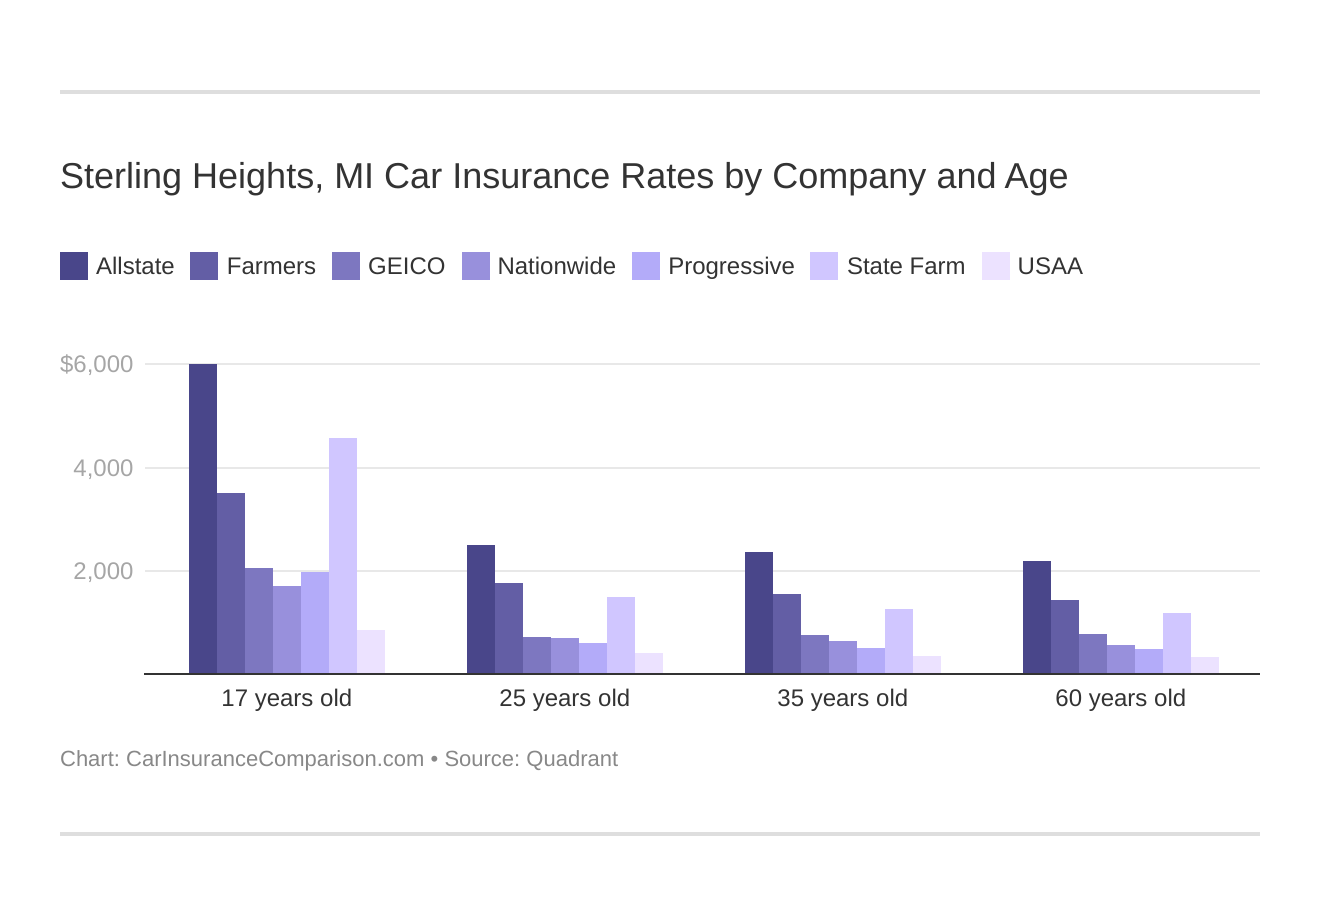 Sterling Heights, MI Car Insurance Rates by Company and Age